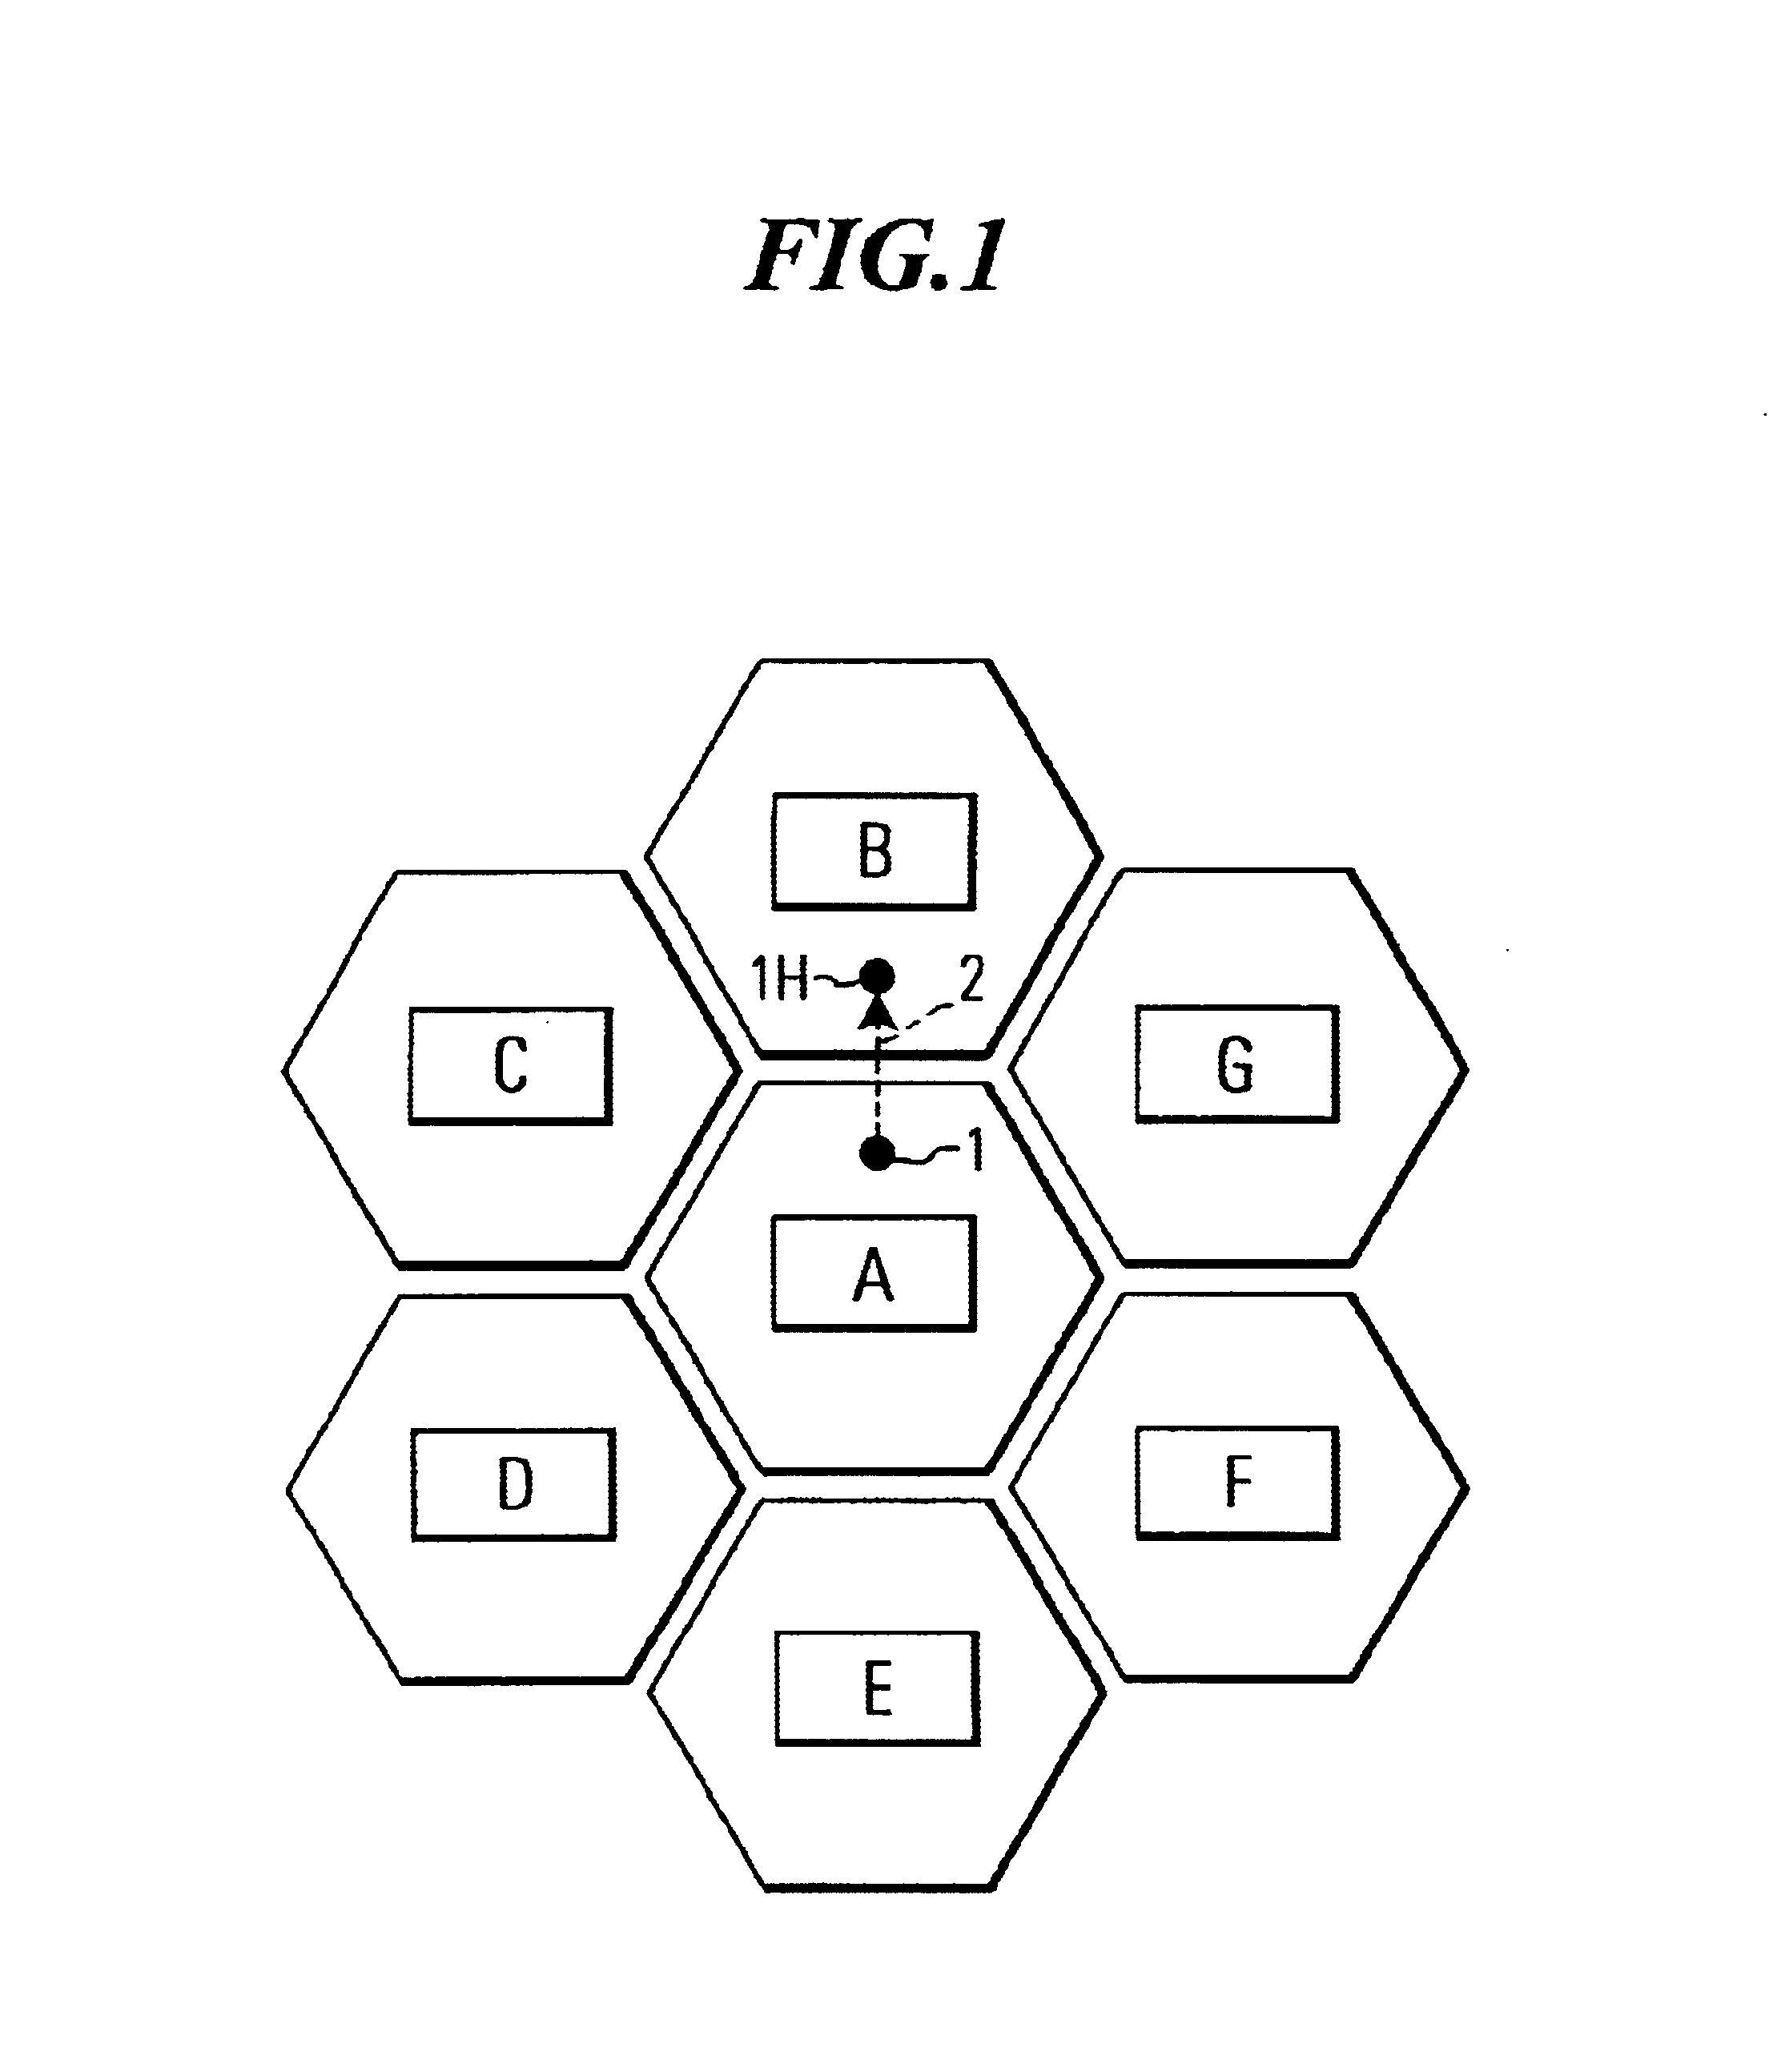 Method for the determination of cell borders in cellular data communications systems